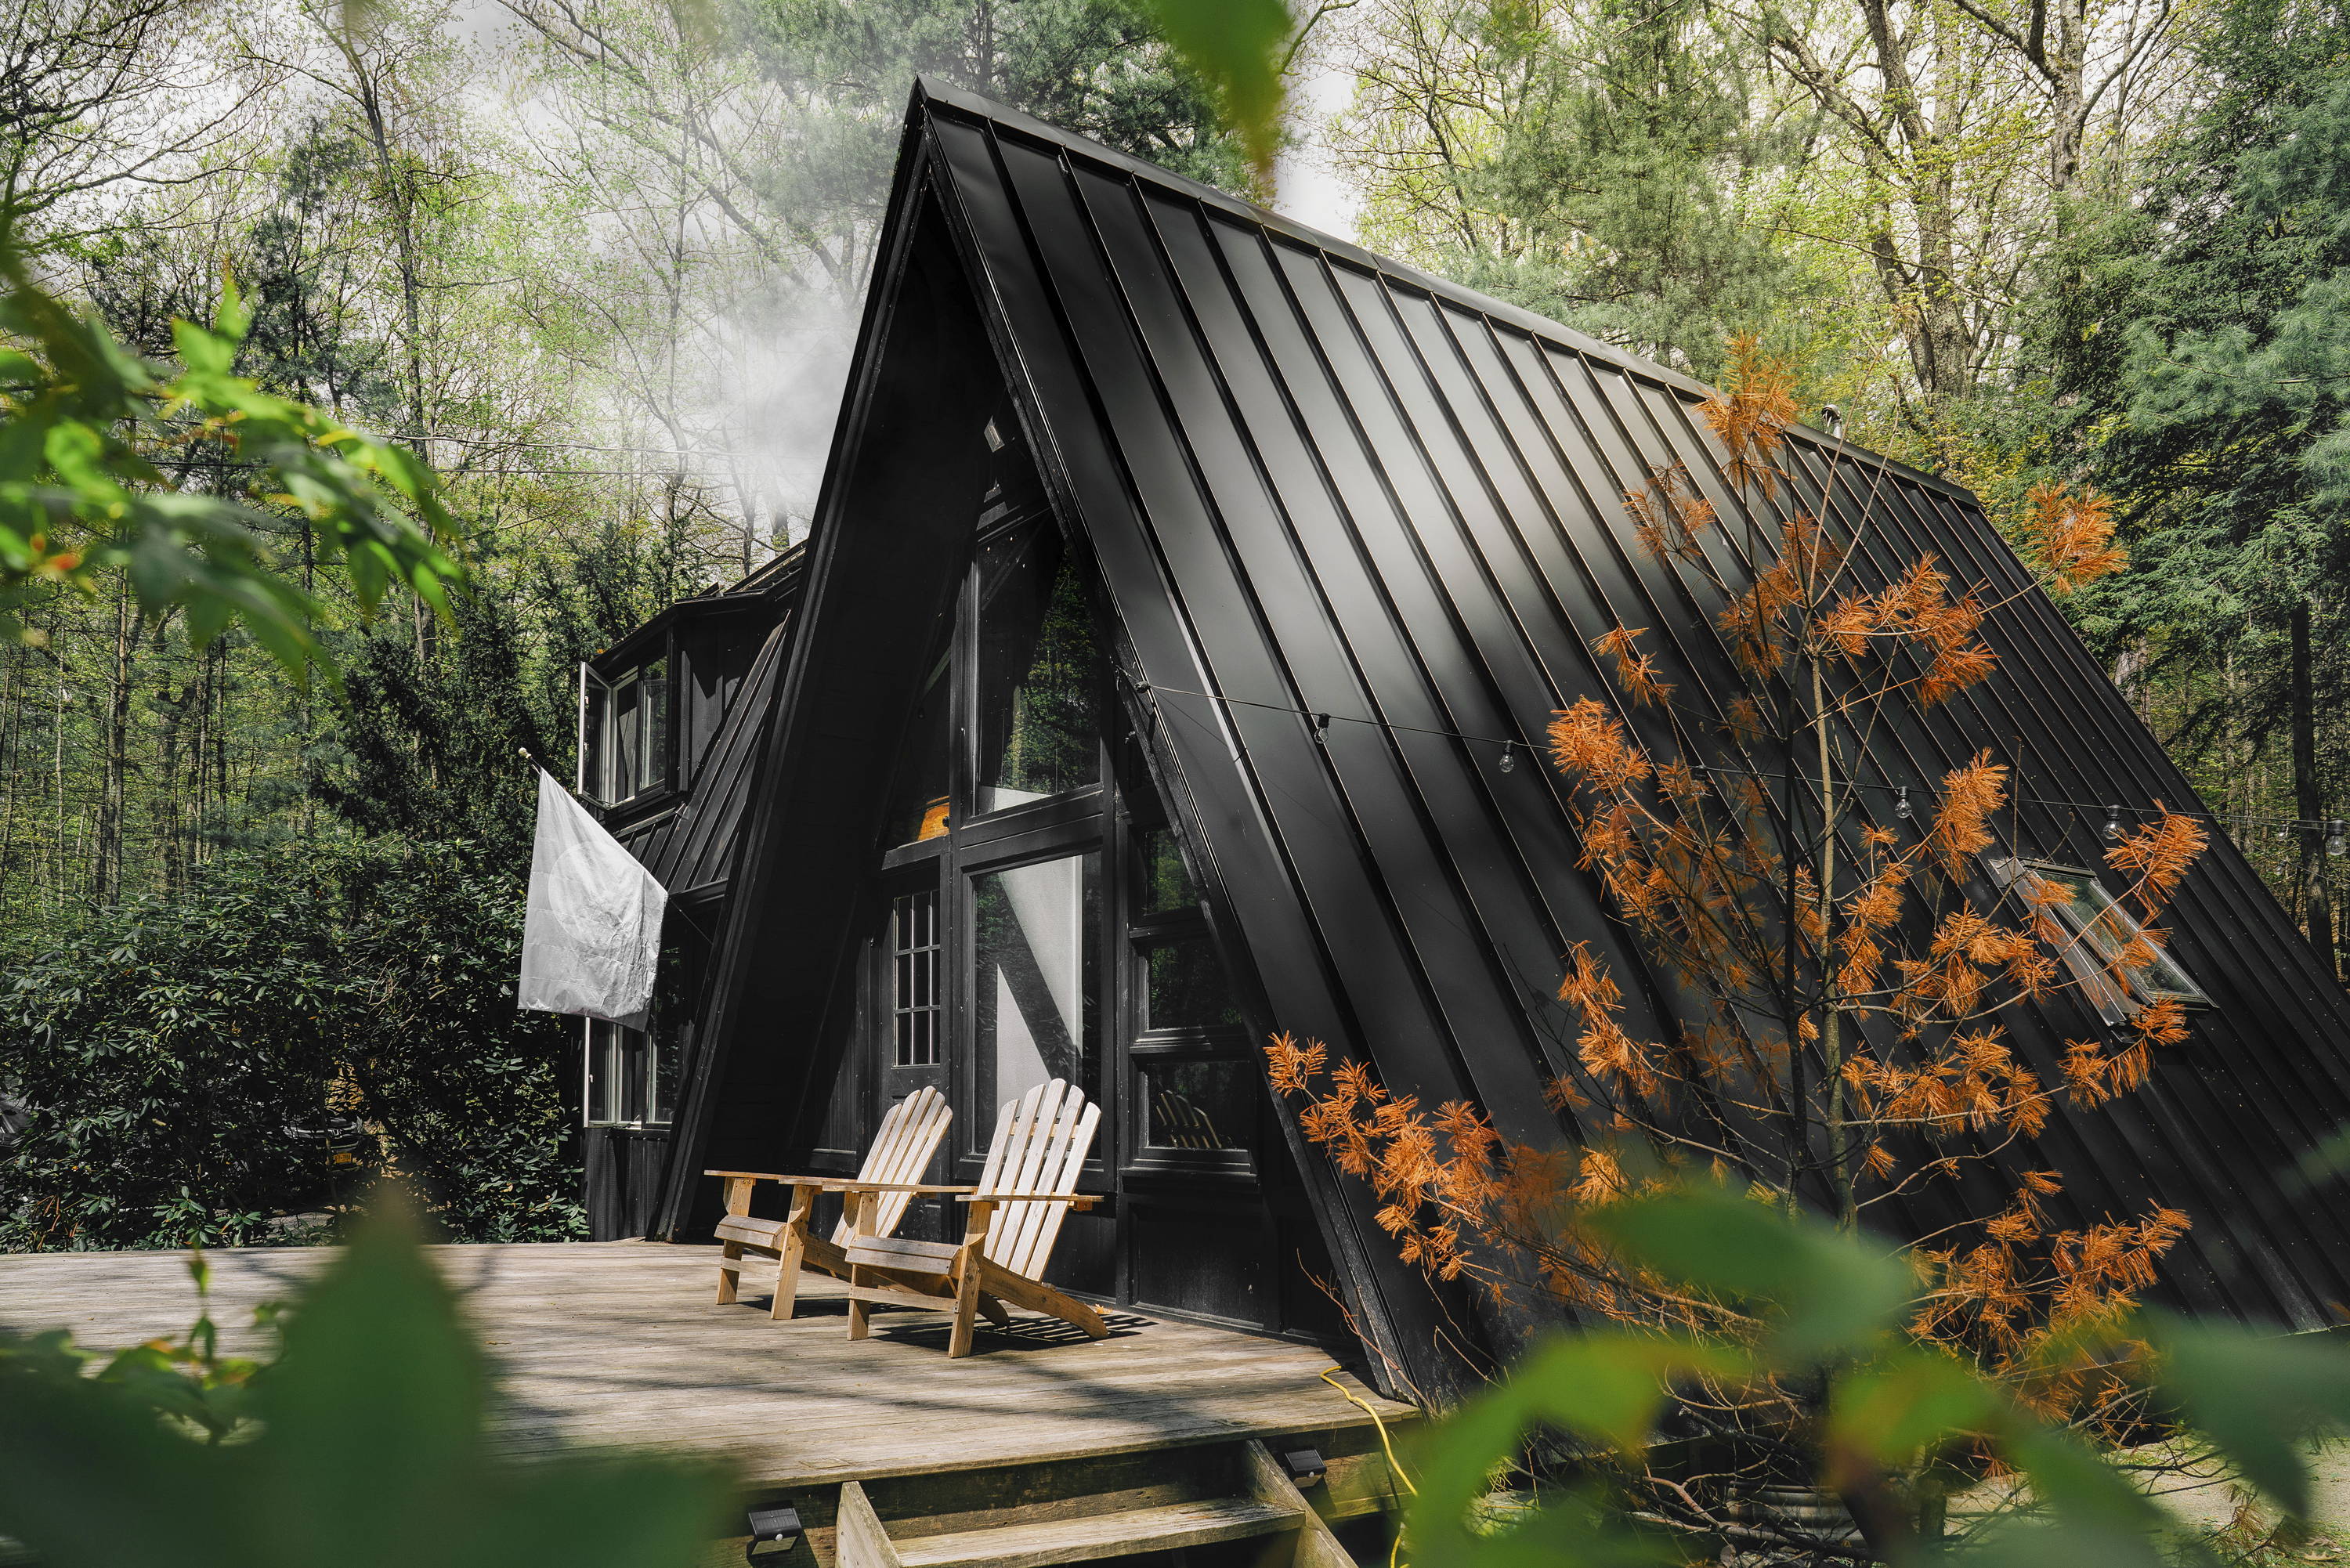 Rent a solar powered, off-grid A-frame cabin with modern amenities